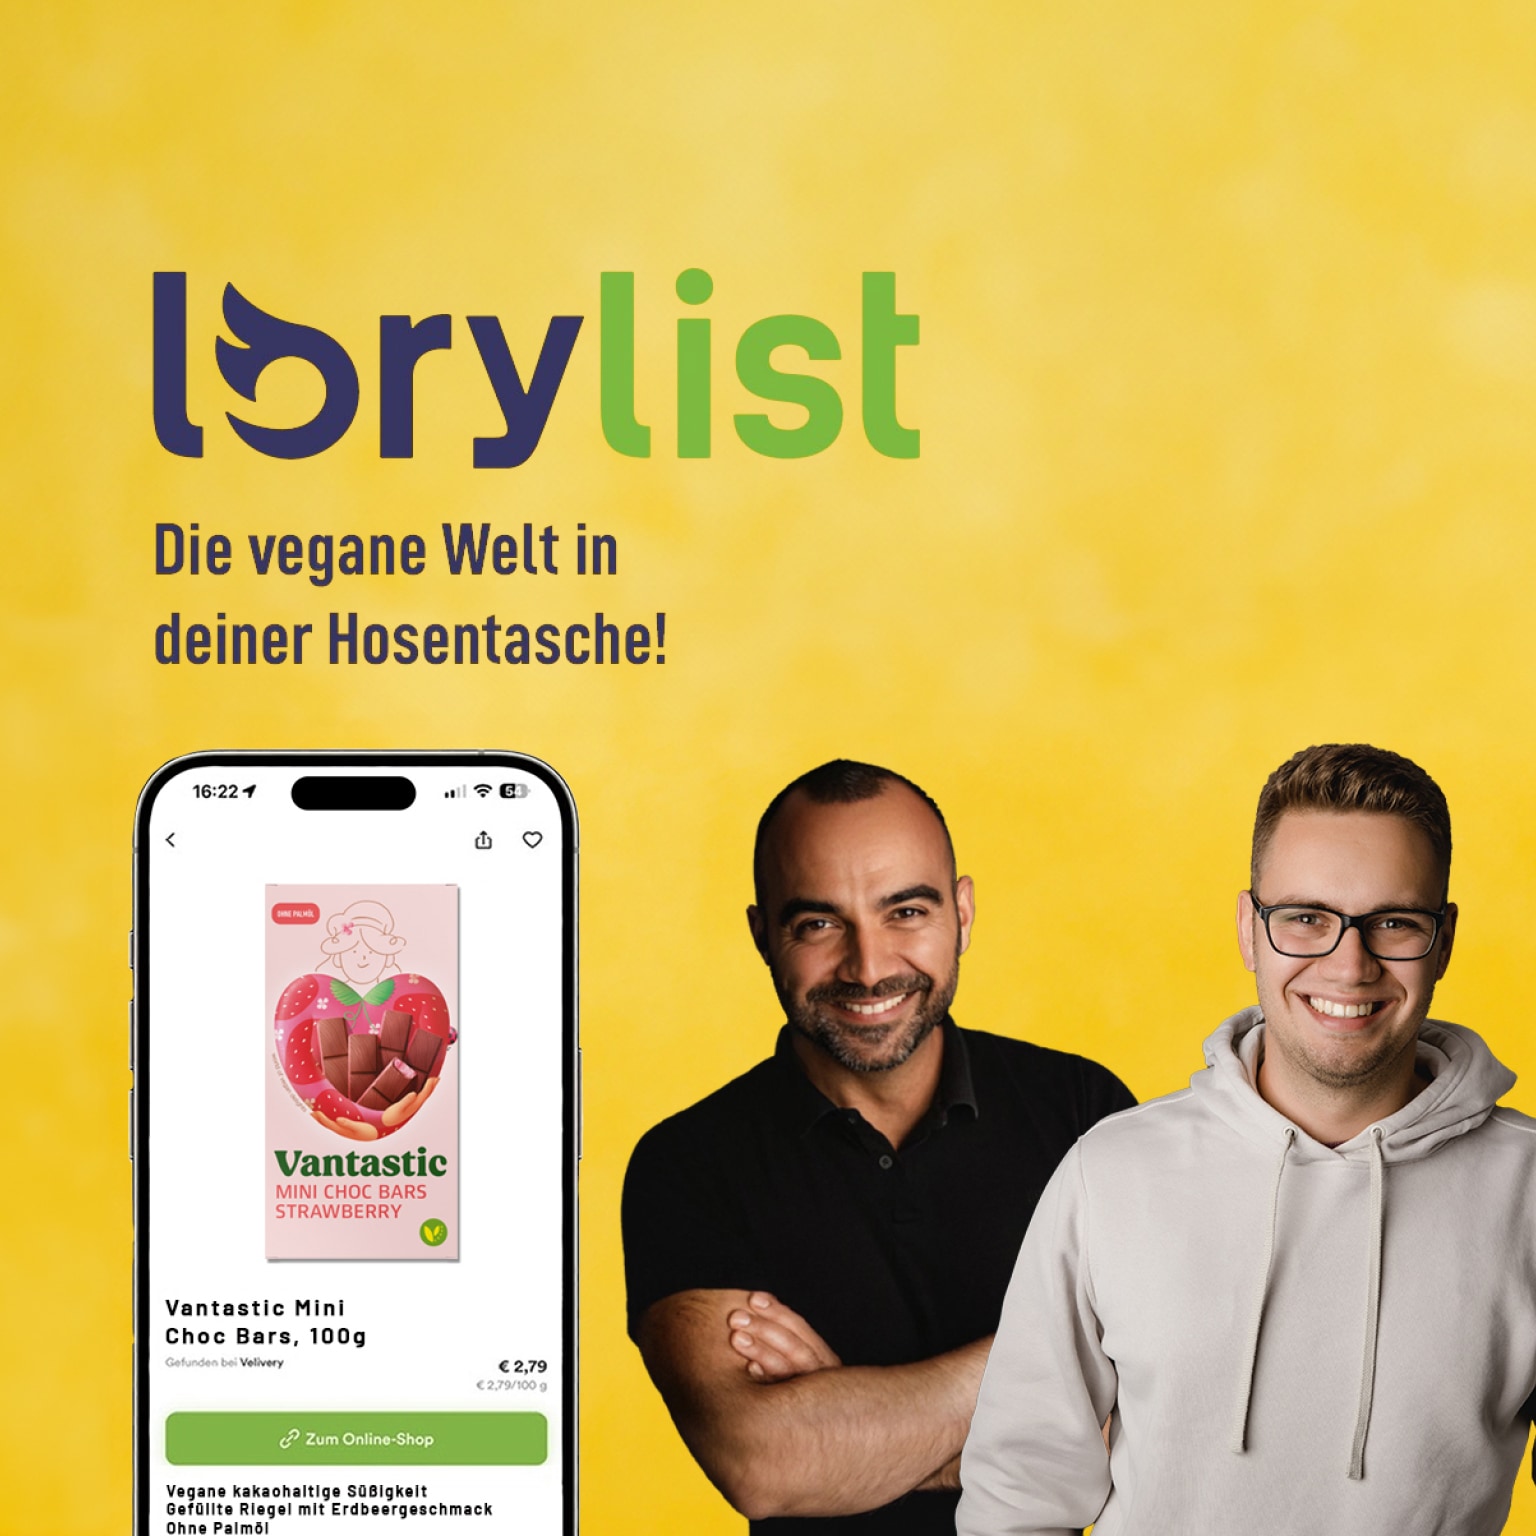 360 degrees of vegan shopping with lorylist